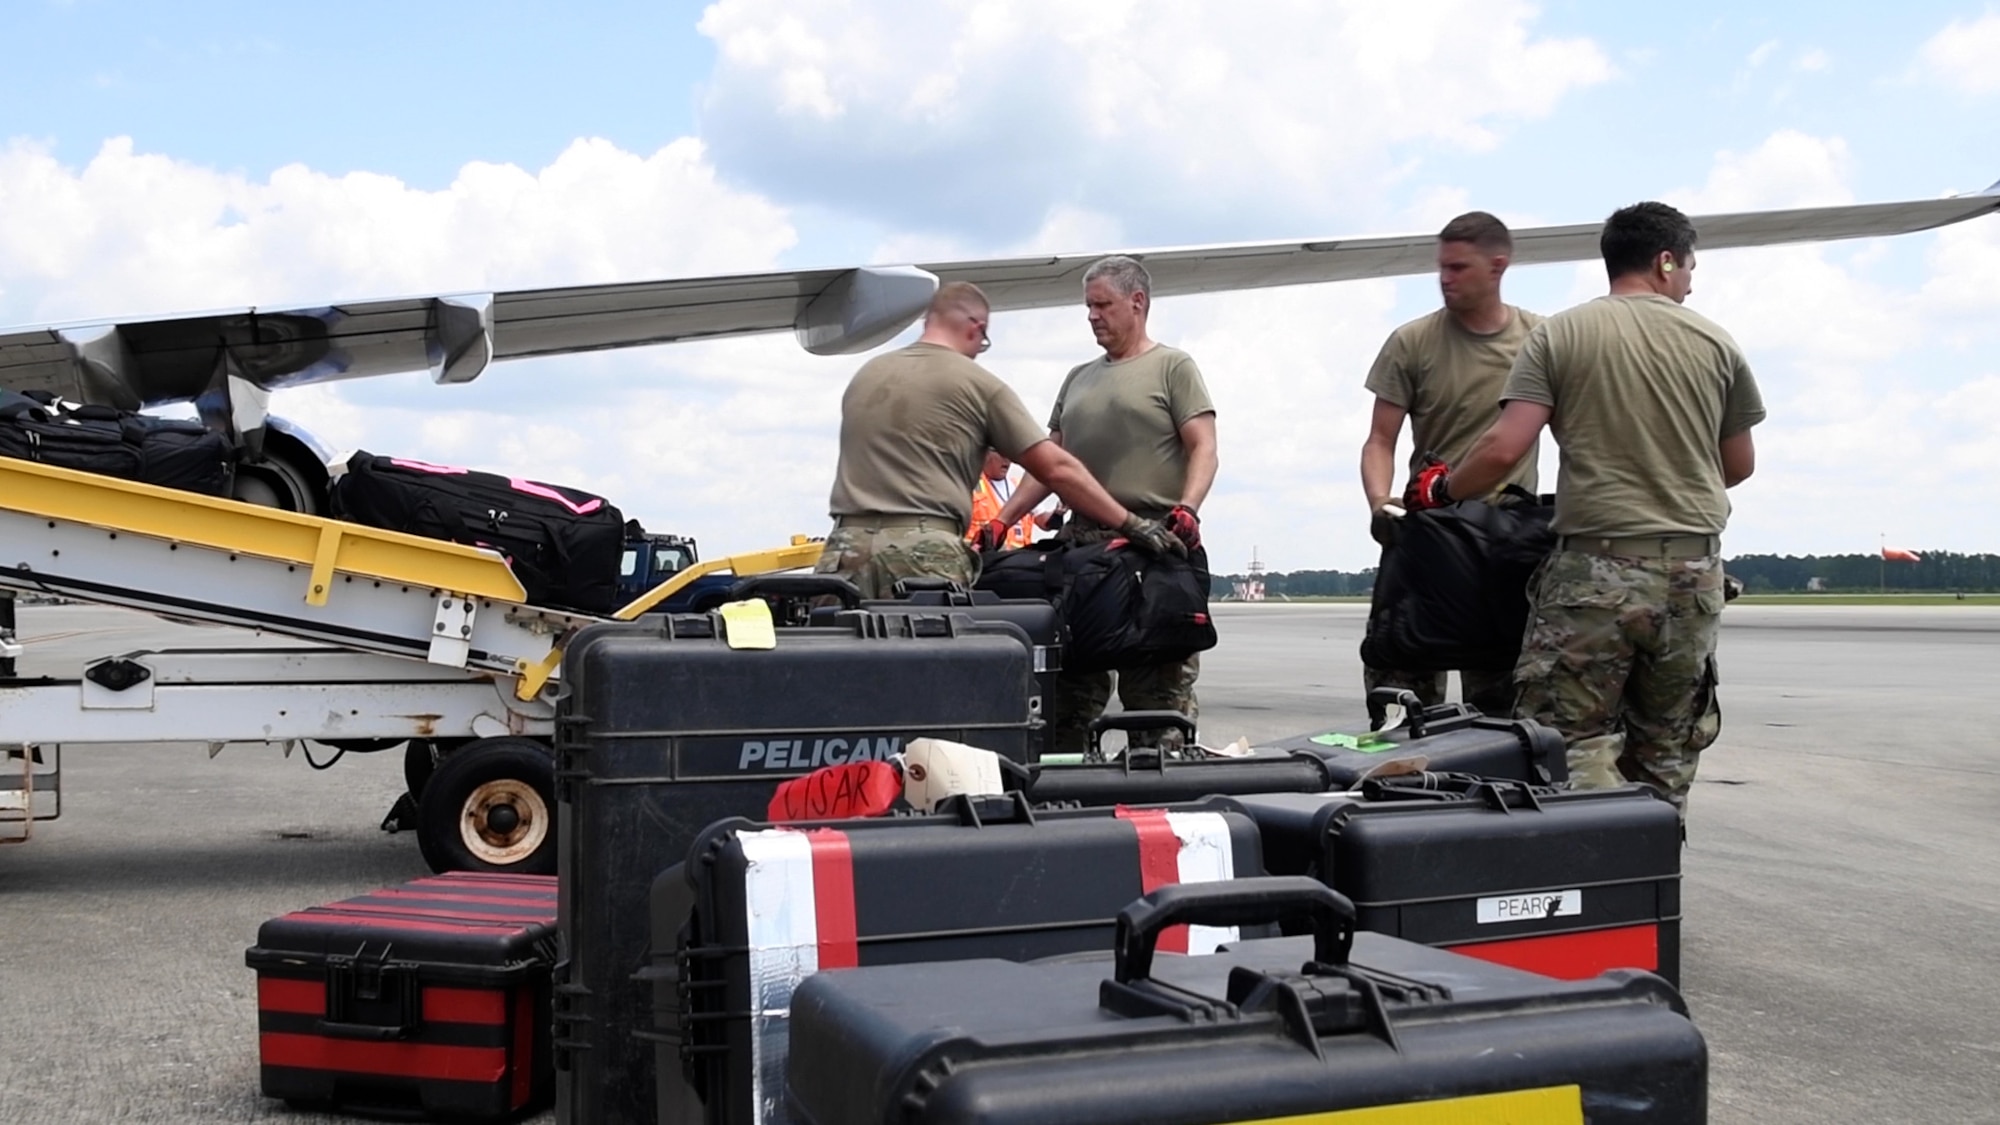 Reservists from the 419th Fighter Wing assist in loading 6,000 pounds of cargo on an airplane for personnel deploying from Hurlburt Field, Florida, July 23, 2021. The reservists were embedded with the 1st Special Operations Group for their two-week annual tour, working alongside active duty.